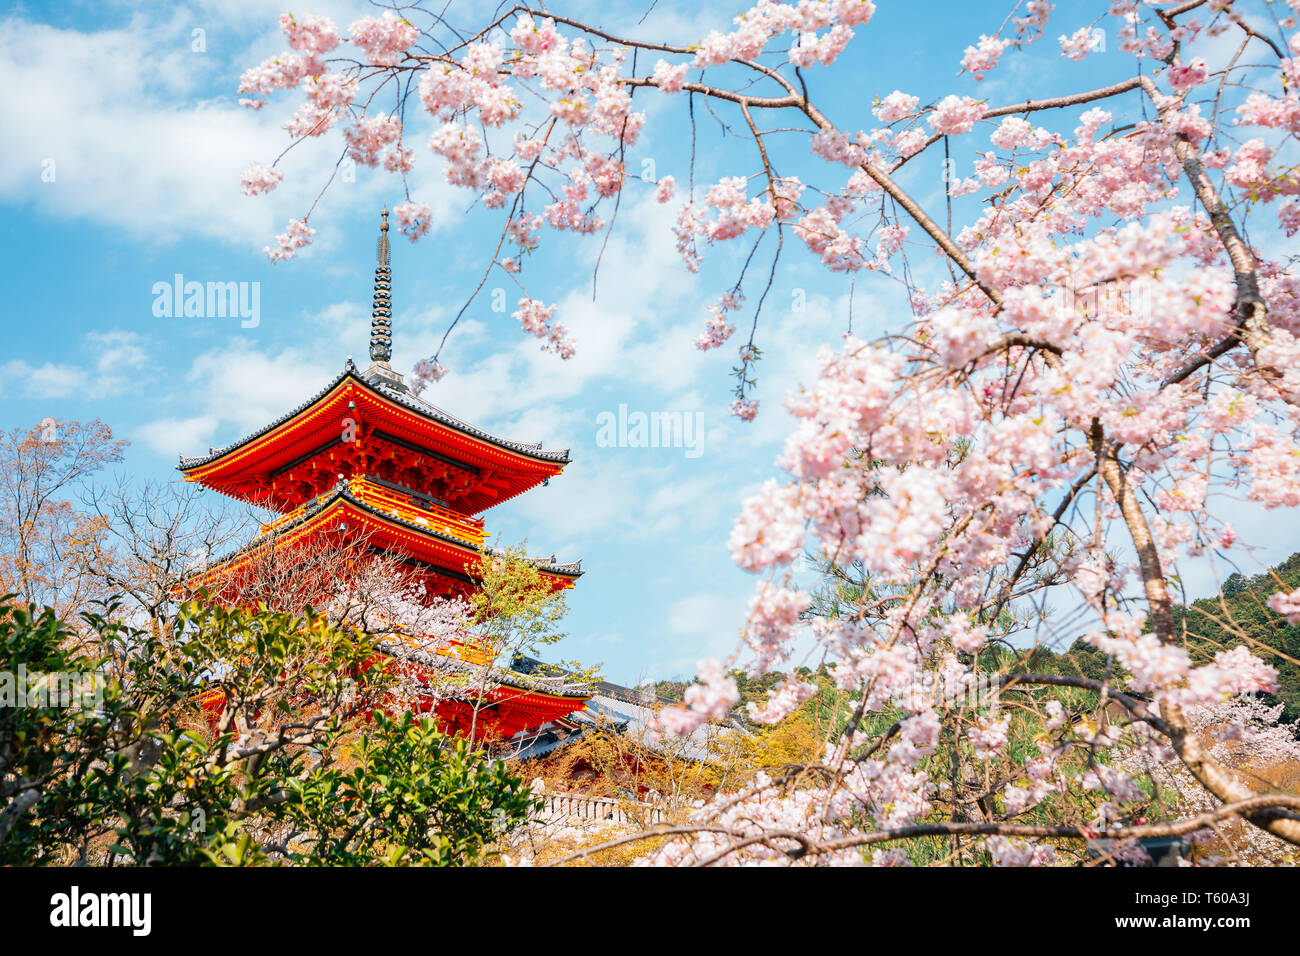 Kiyomizu-dera temple with cherry blossoms at spring in Kyoto, Japan Stock Photo